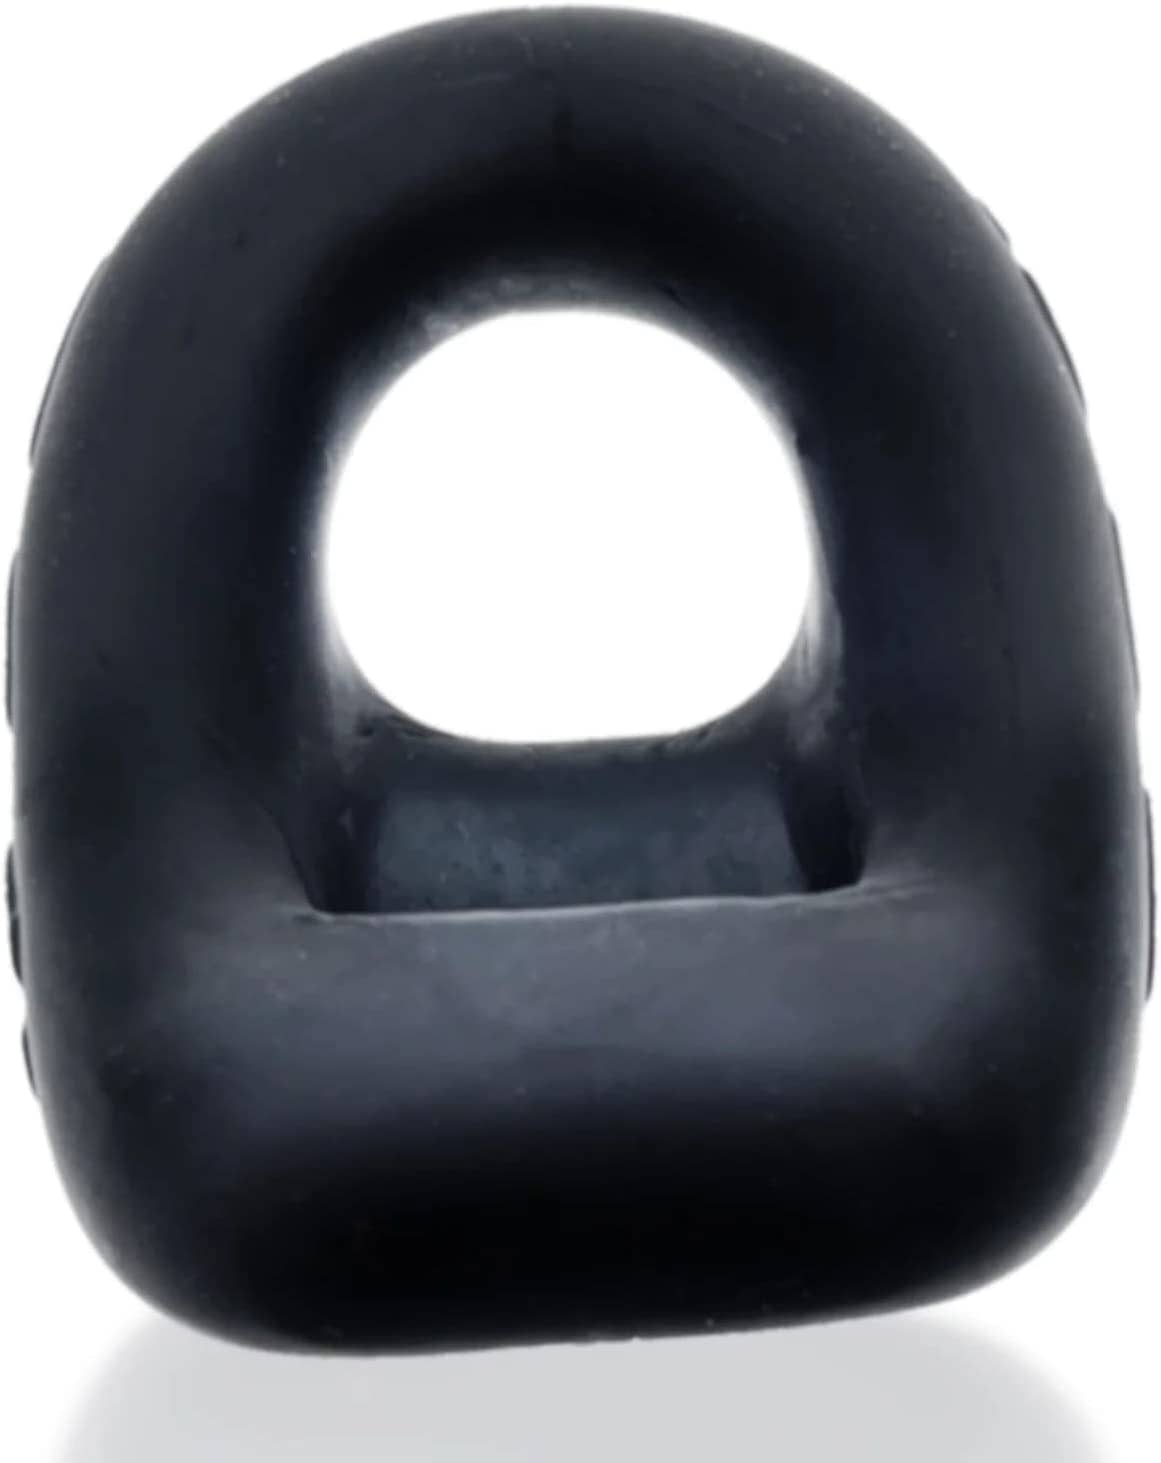 Oxballs 360 Cockring and Ballsling